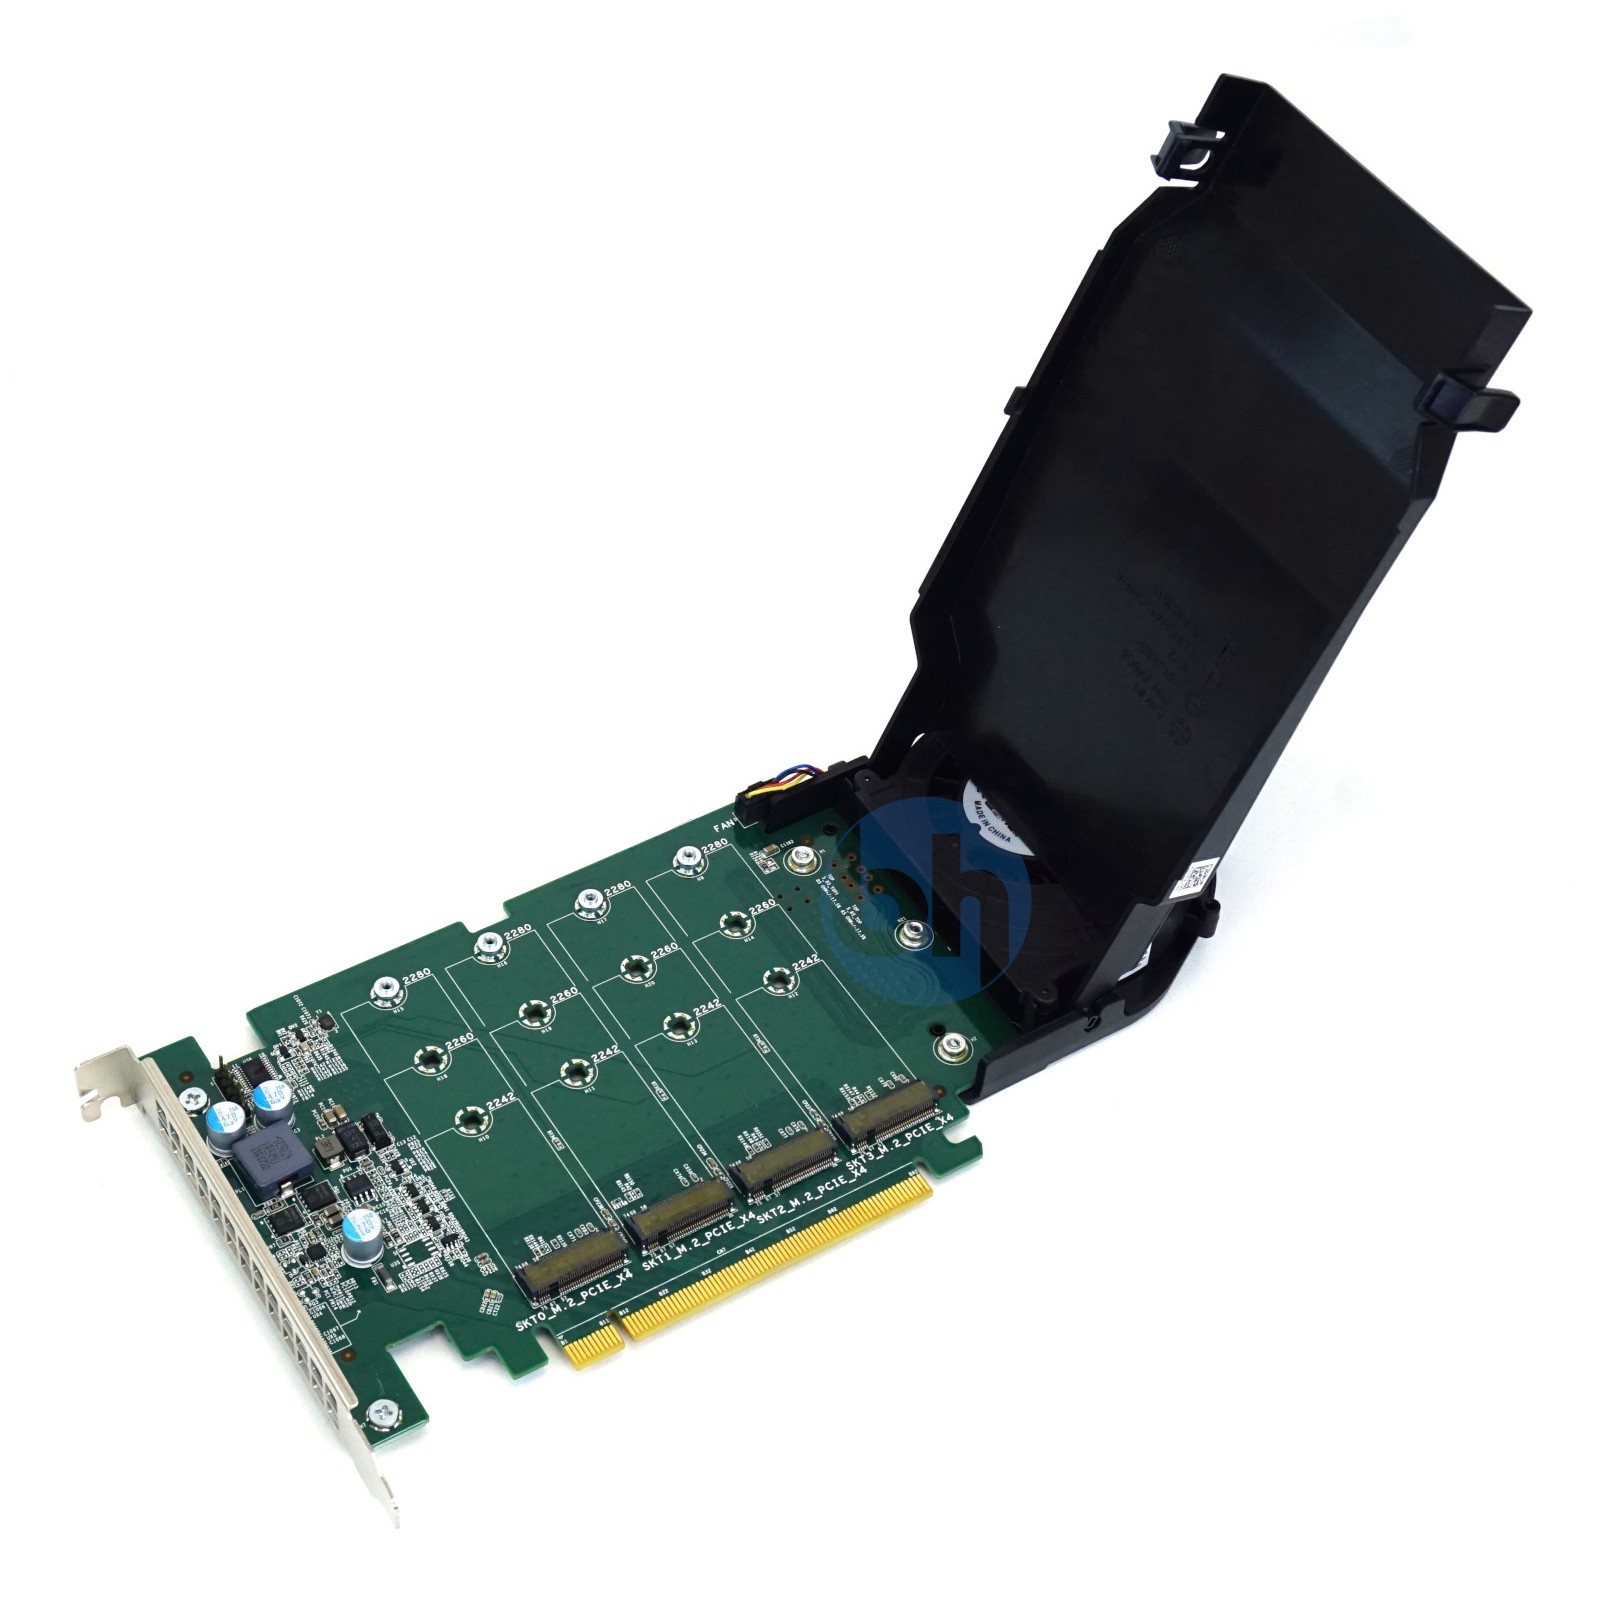 Dell (80G5N) DPWC400 - FH PCIe-x16 Quad  NVMe Adapter with Fan (080G5N)